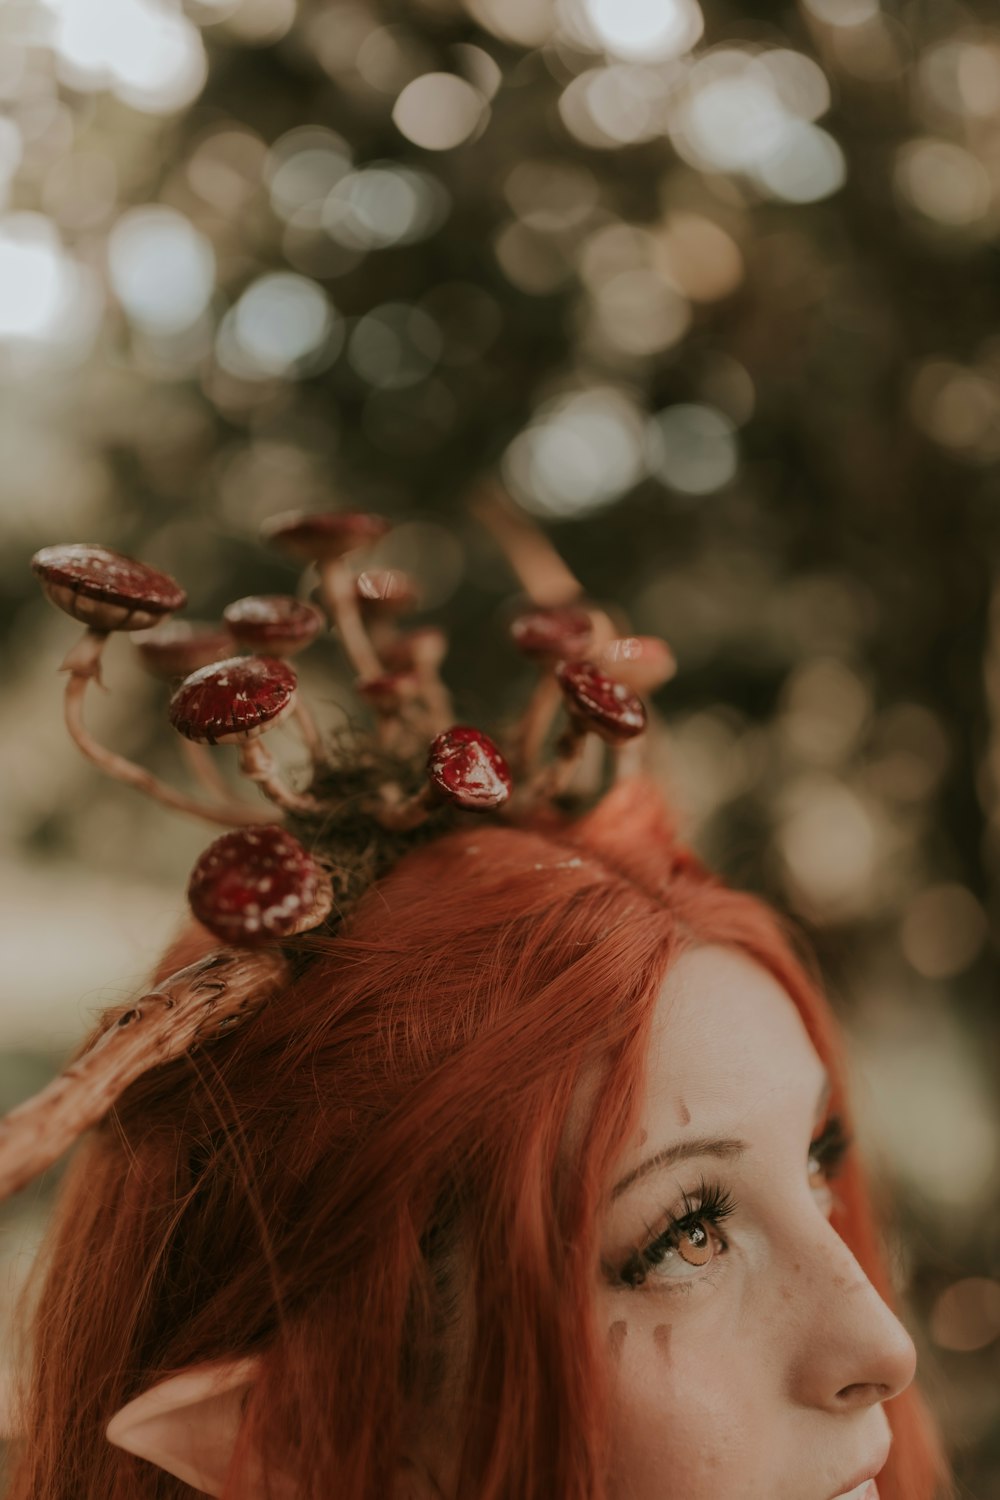 a woman with red hair wearing a flower crown